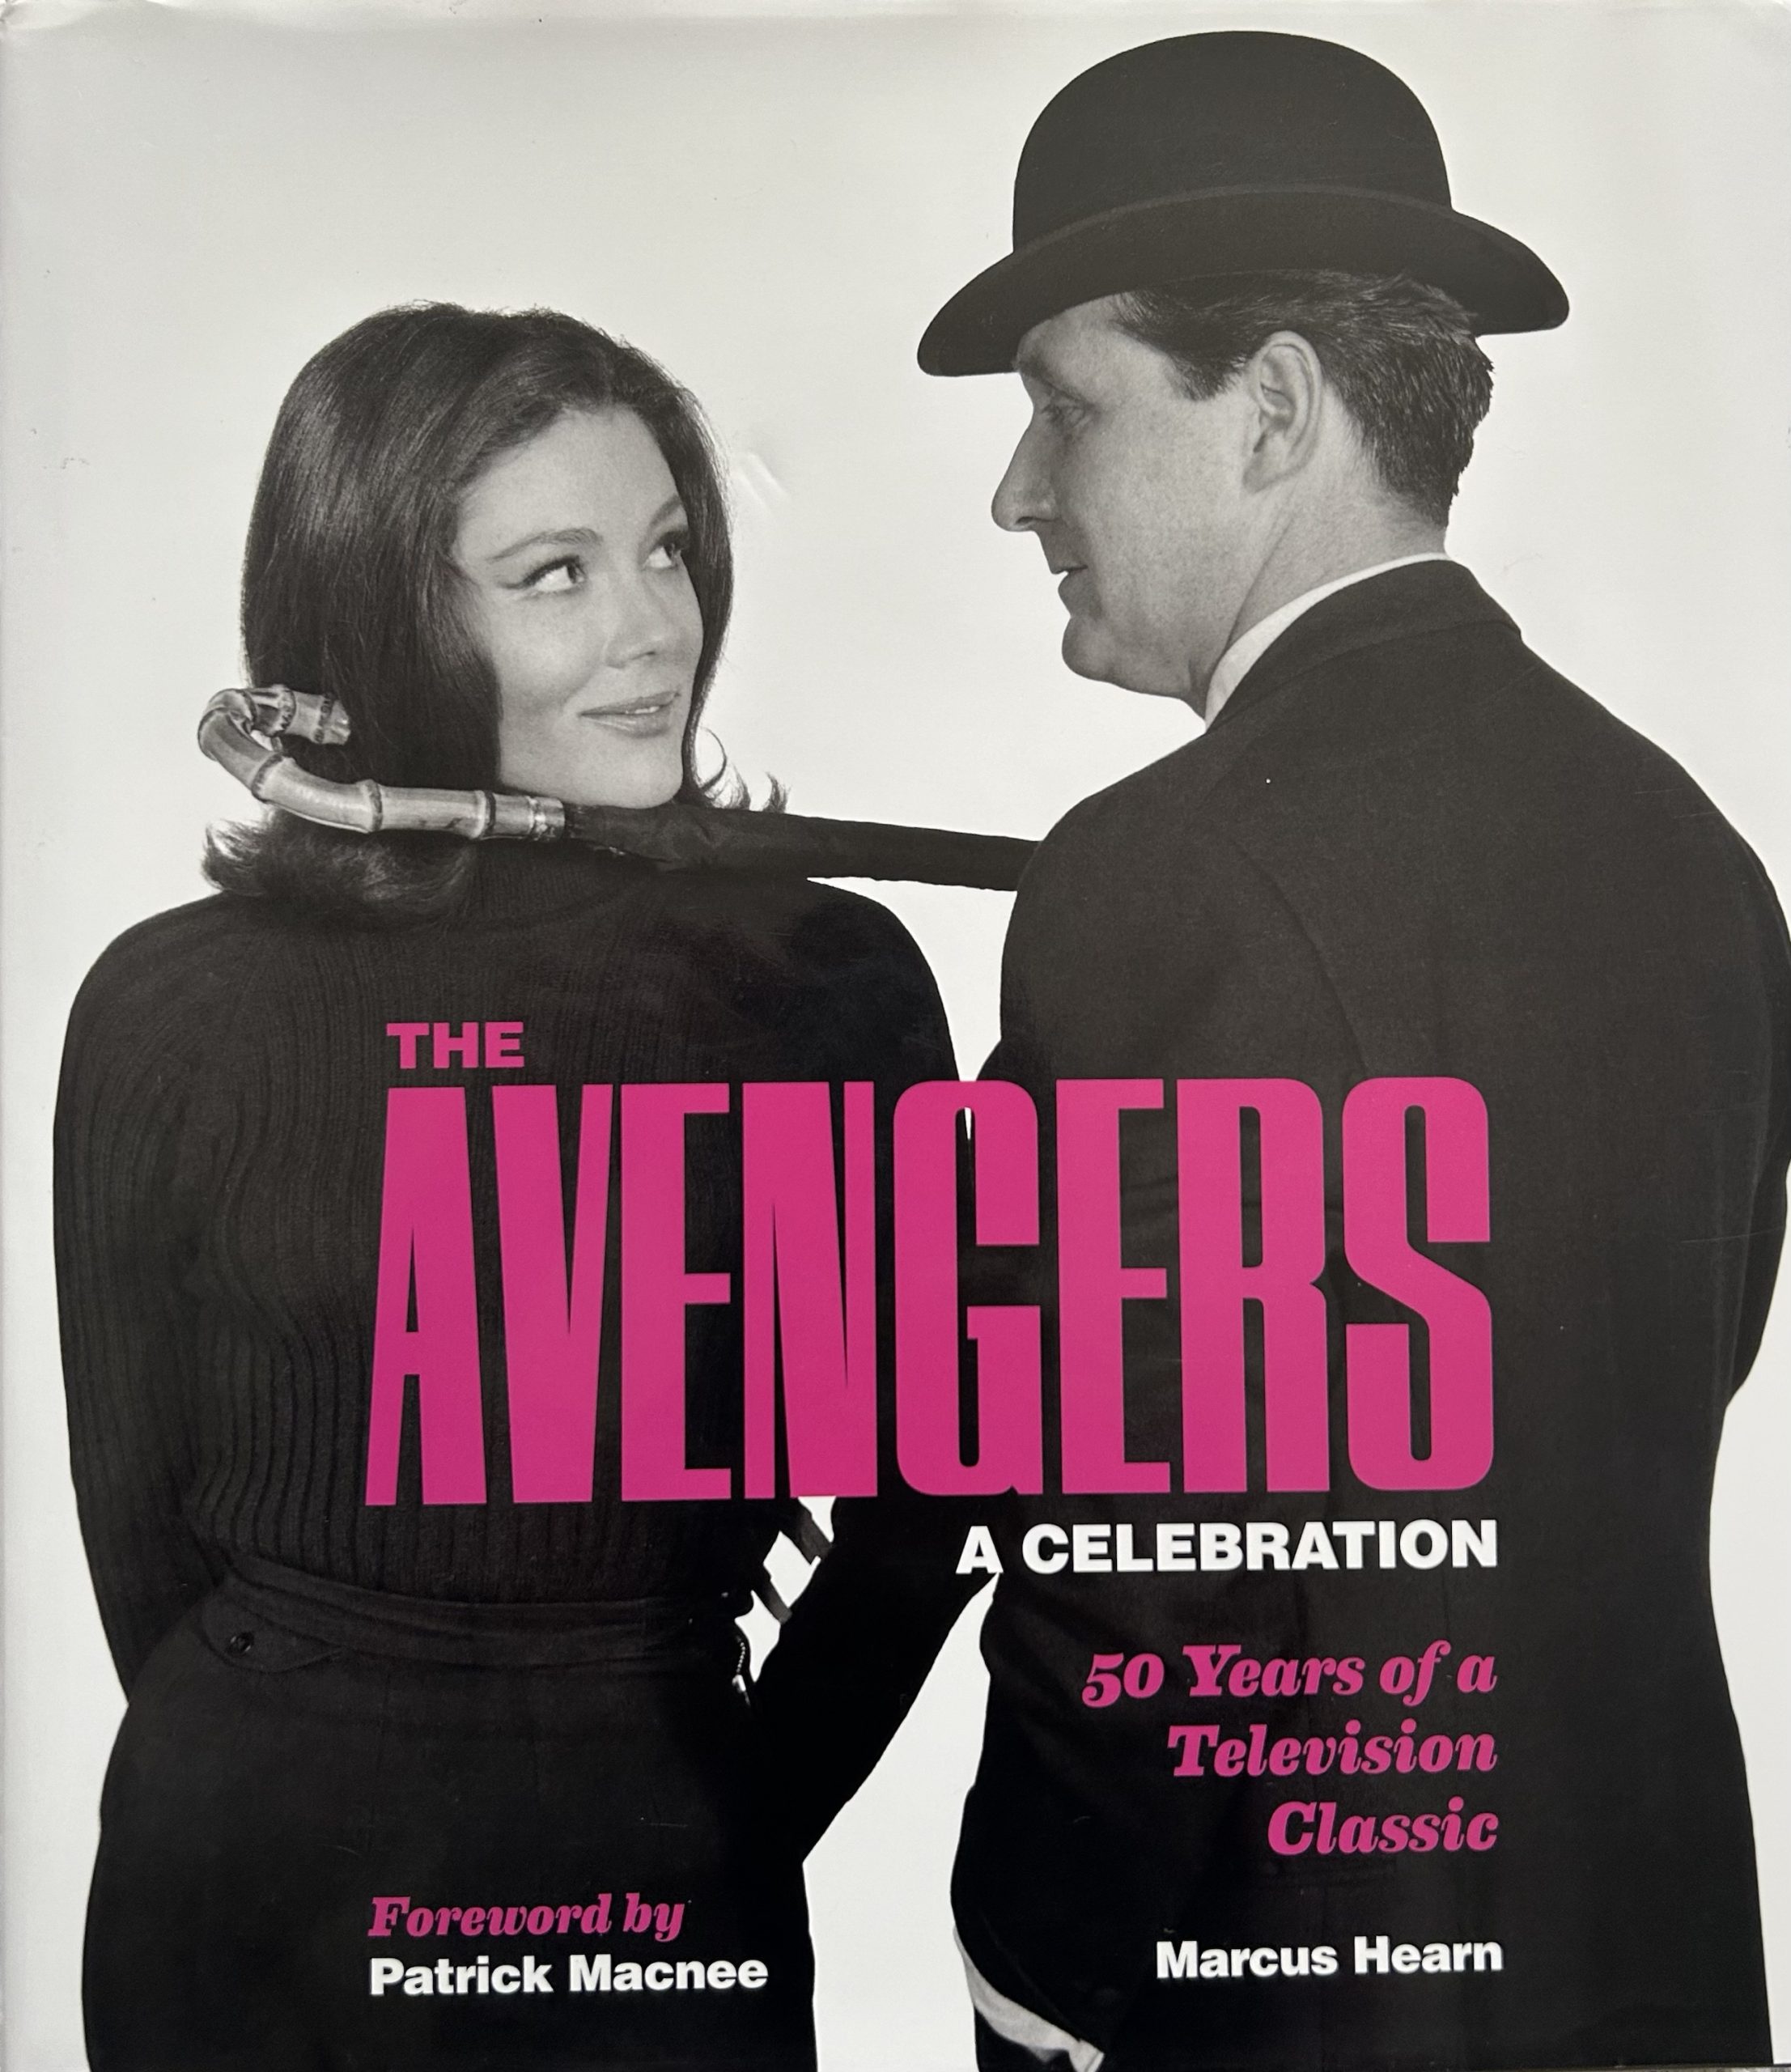 The Avengers: A Celebration - 50 Years of a Television Classic by Marcus Hearn